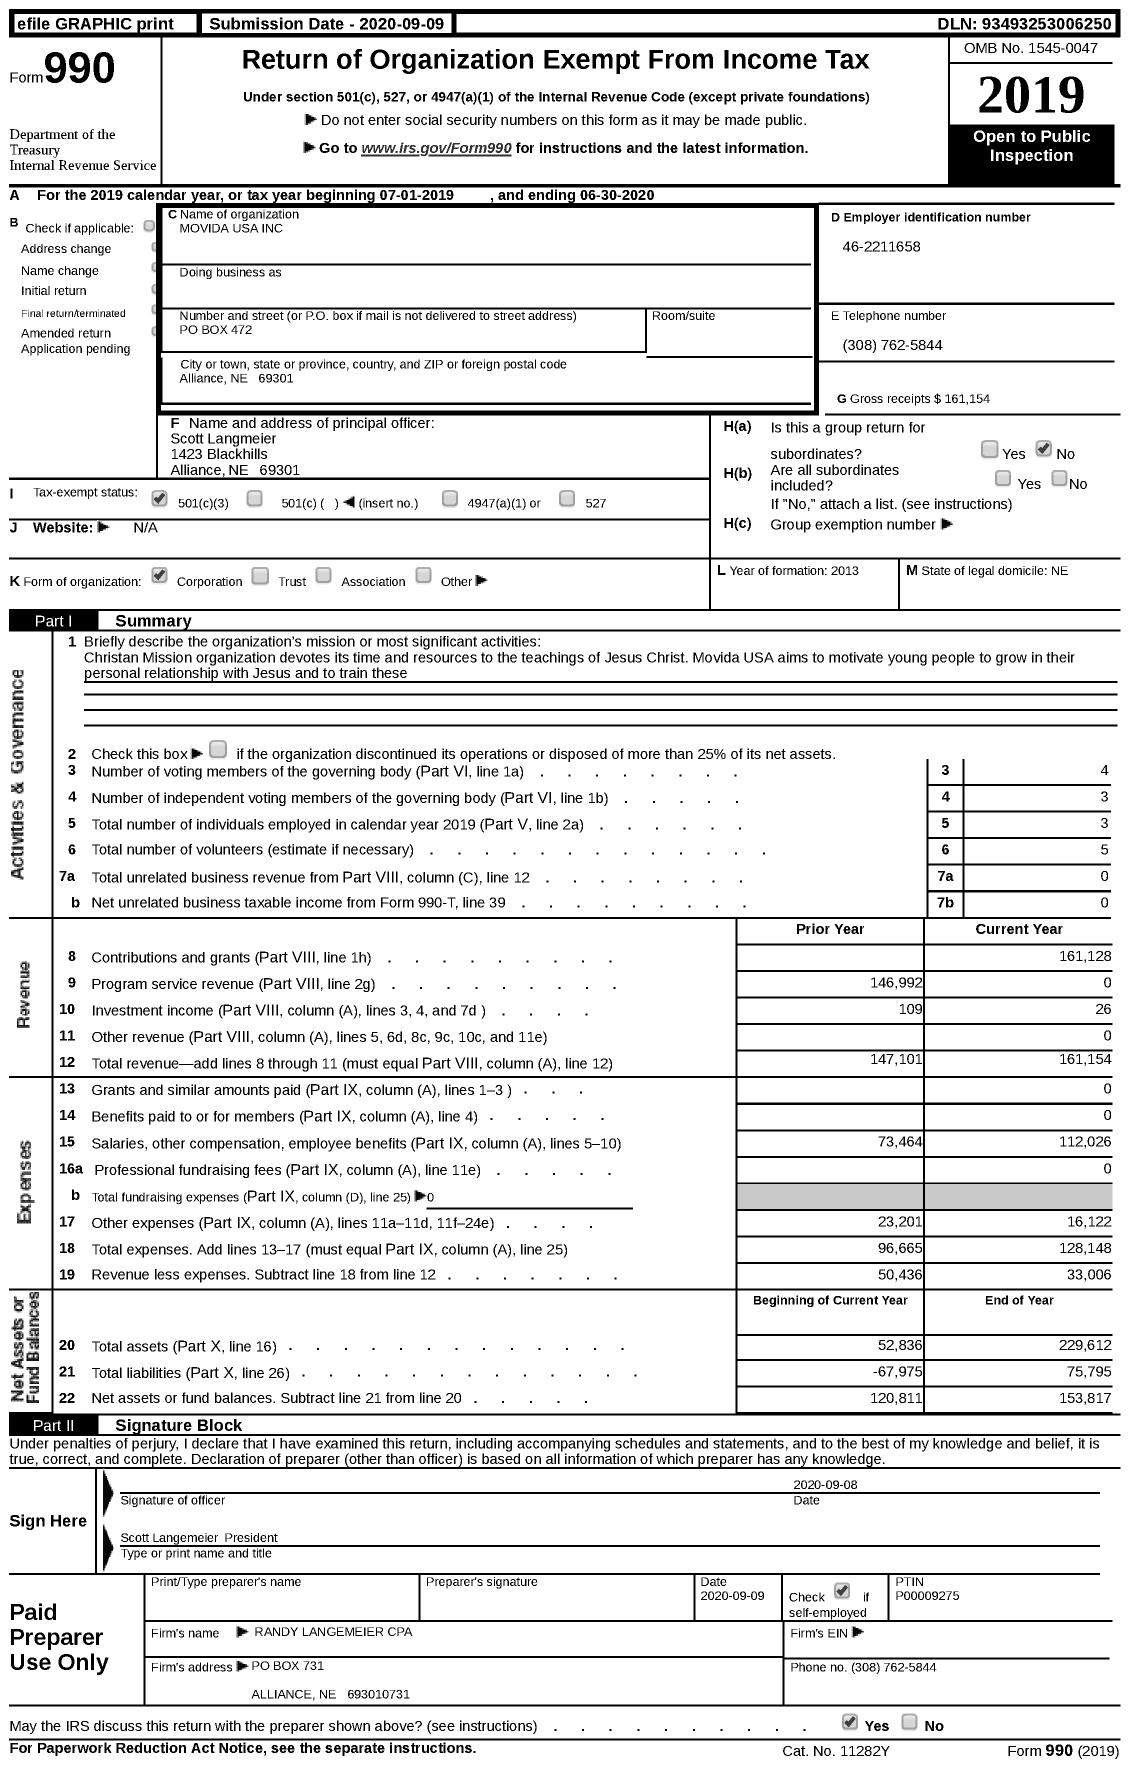 Image of first page of 2019 Form 990 for Movida USA